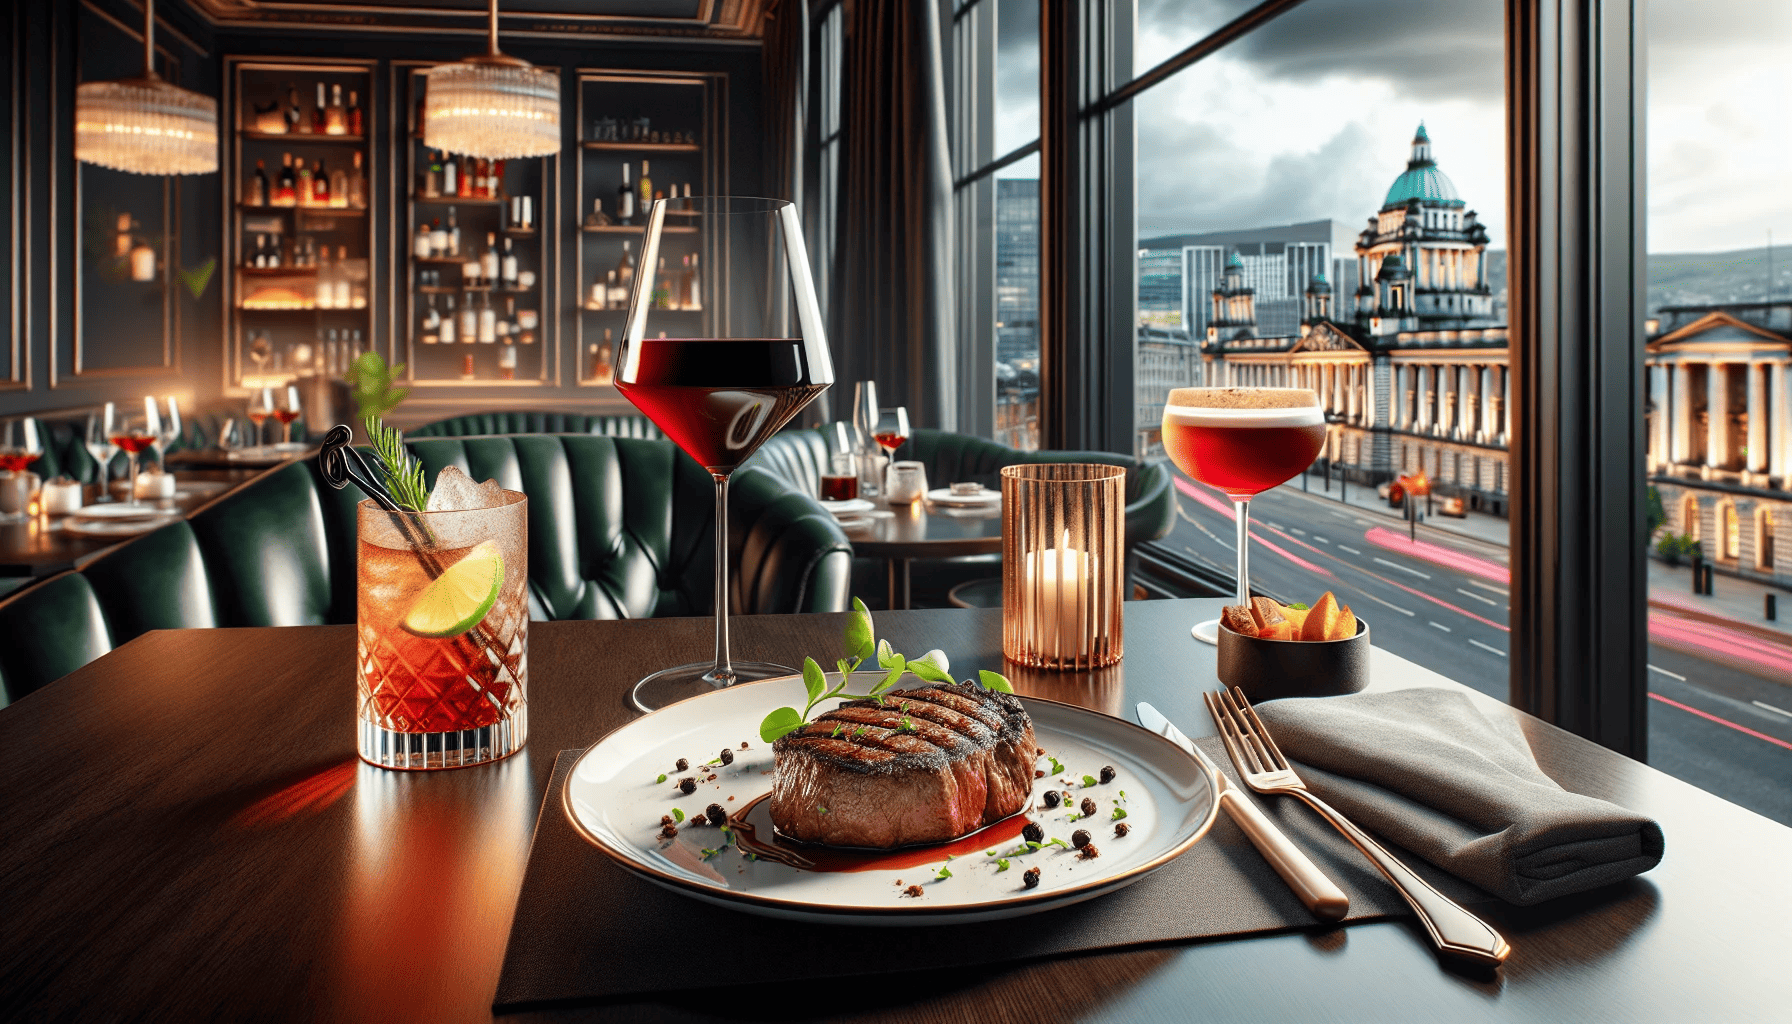 Exquisite wine and cocktail pairings at a steakhouse in Belfast